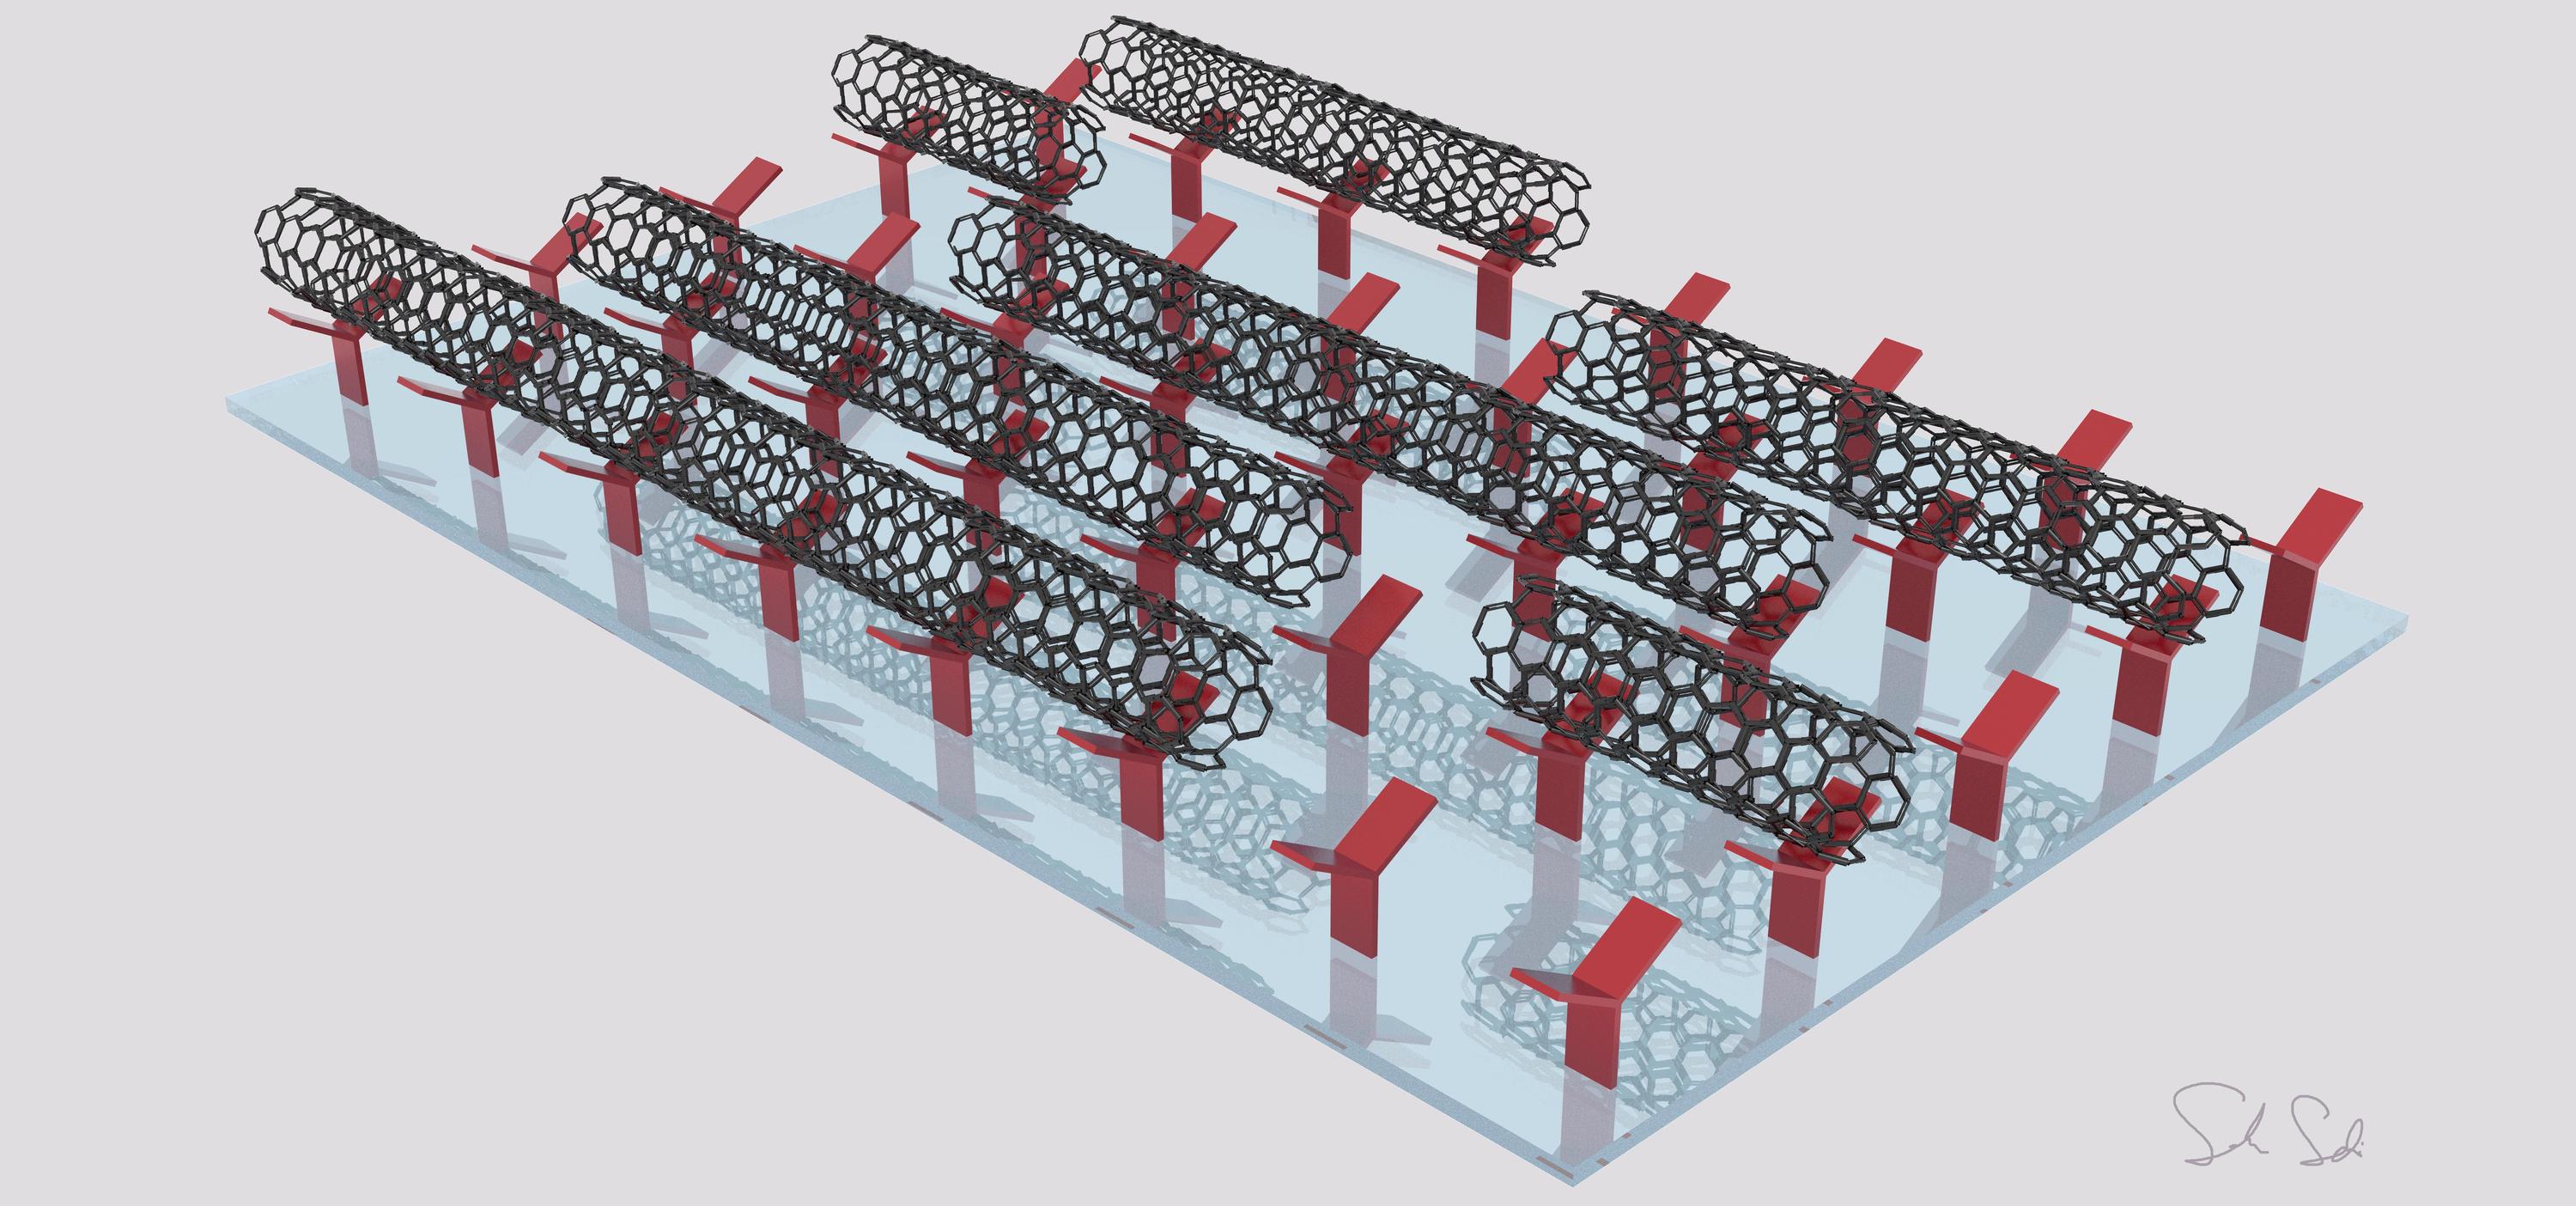 Illustration of carbon nanotubes depositing on a surface with the help of the alignment relay technique.